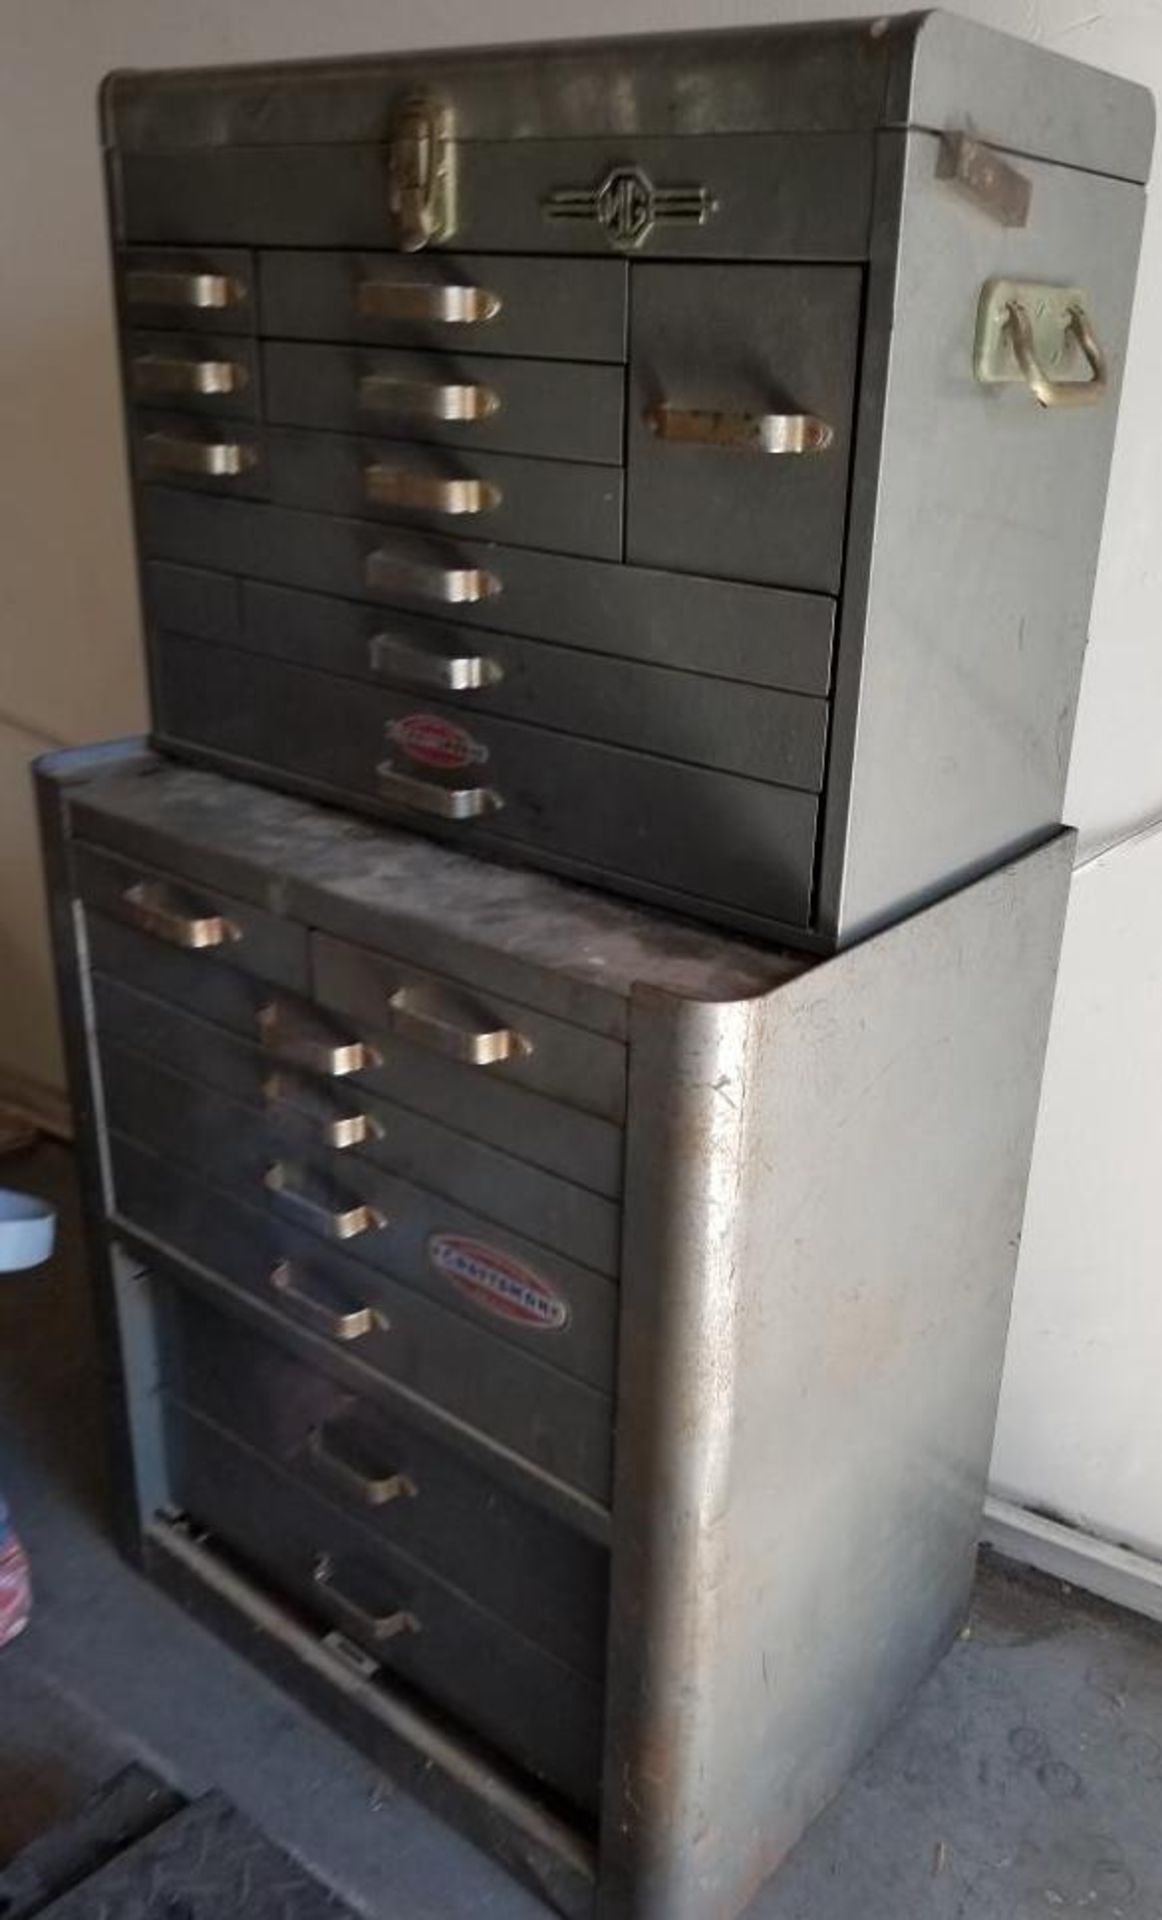 Vintage Craftsman Metal Tool Chest Cabinet Box, 19 drawer, 4 feet tall *Los Angeles Area Pick Up